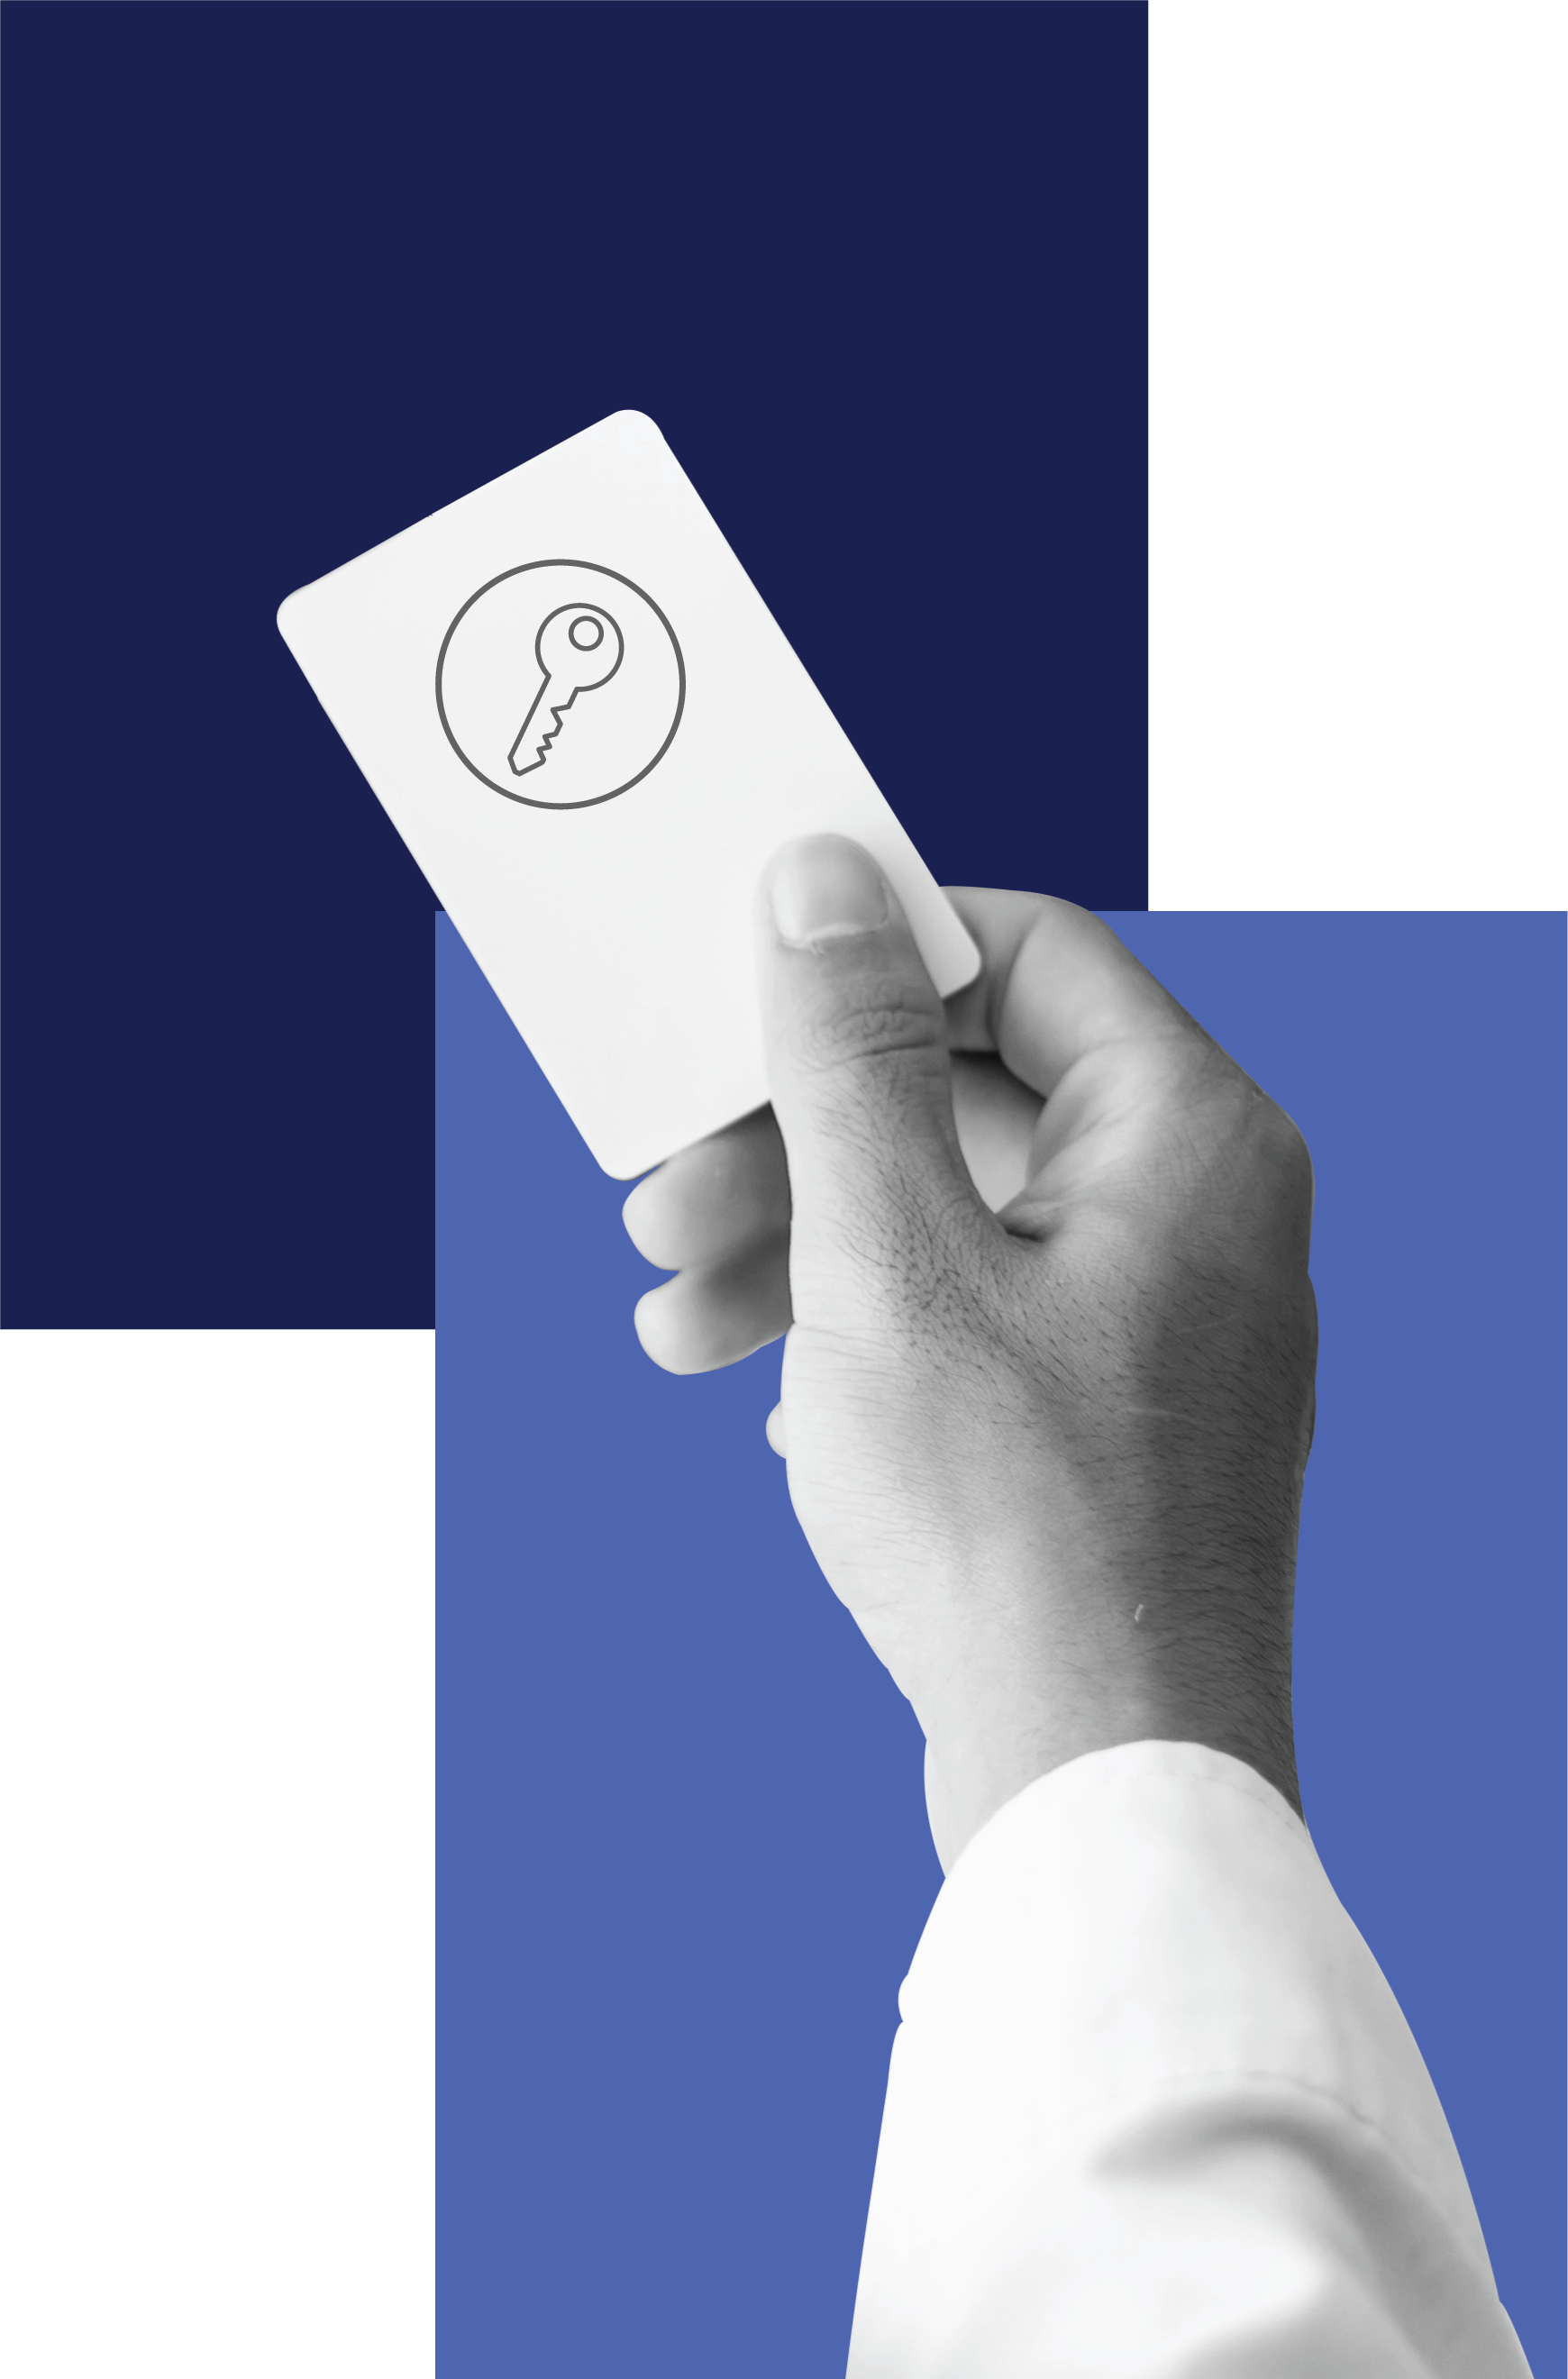 A hand holding a key card against a blue background